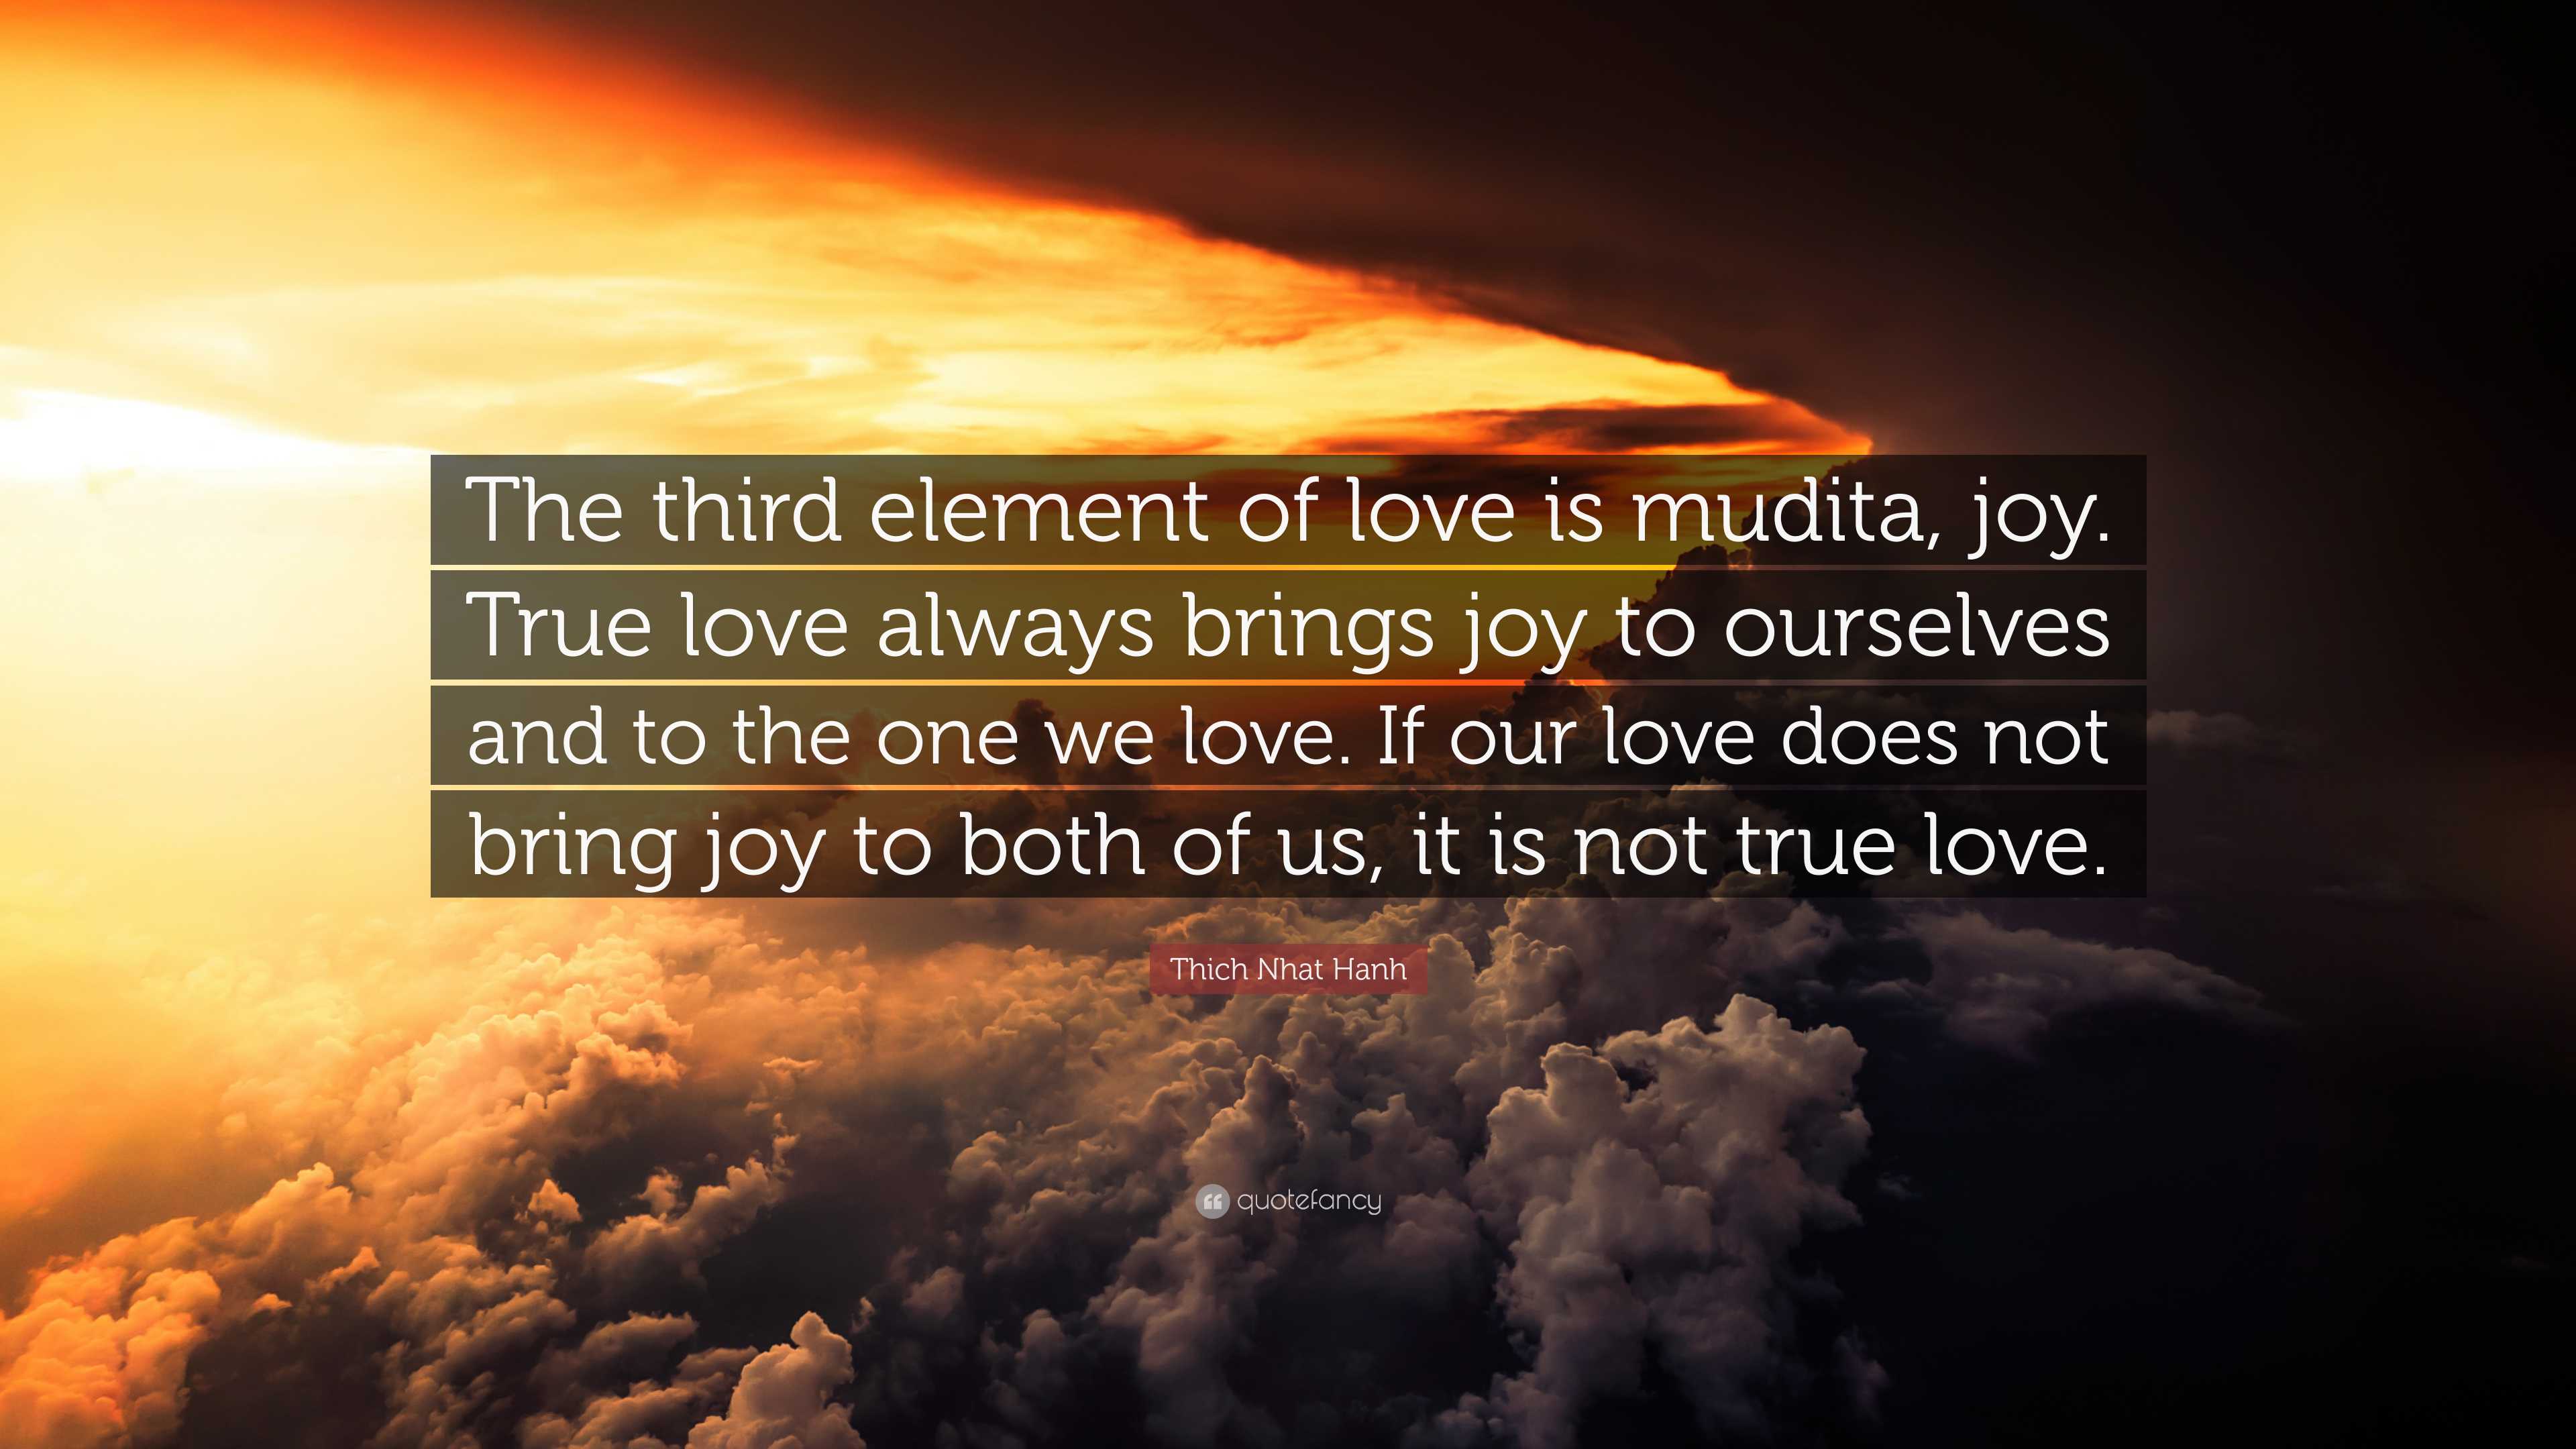 Thich Nhat Hanh Quote: “The third element of love is mudita, joy. True love  always brings joy to ourselves and to the one we love. If our love d”